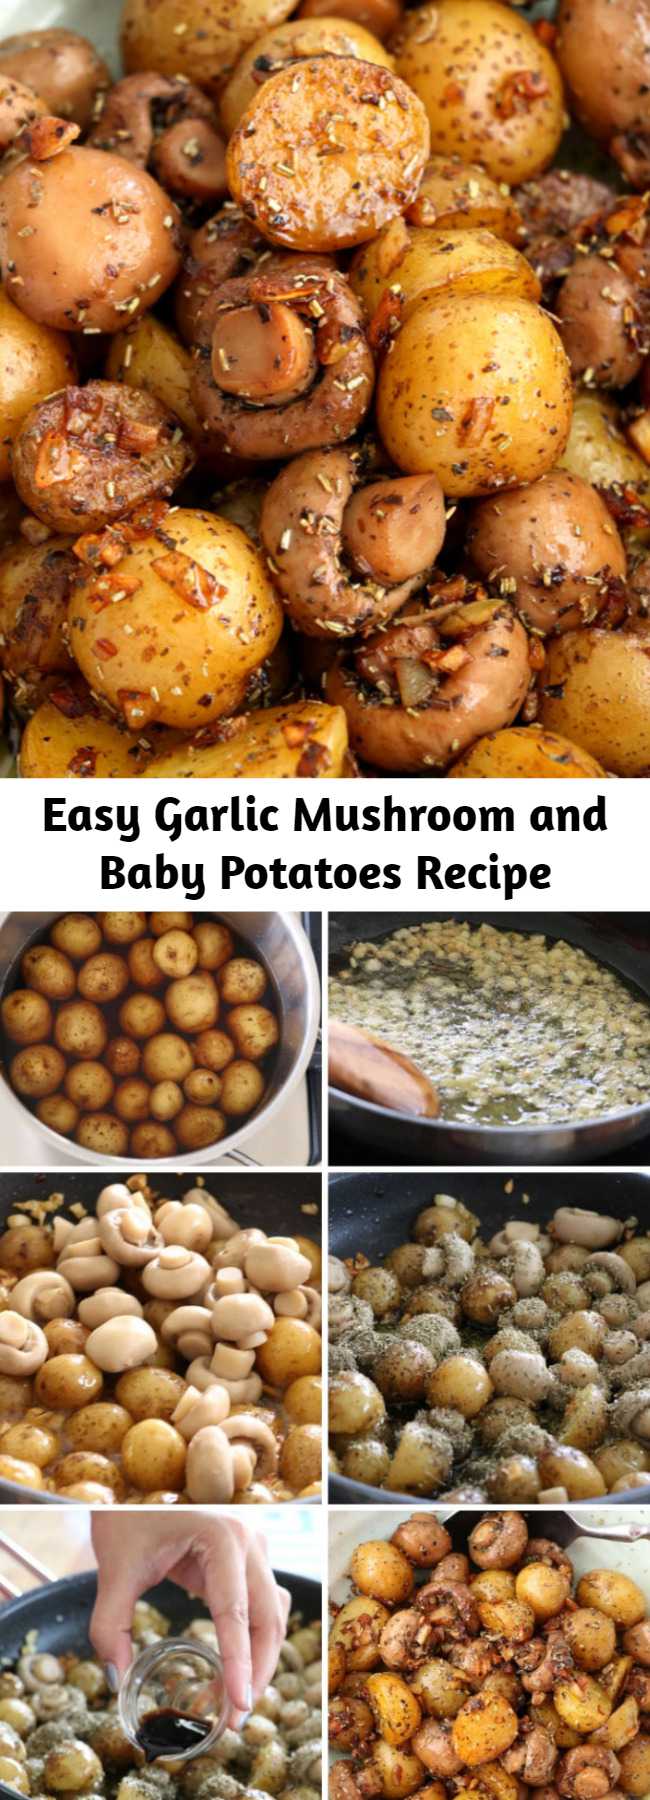 Easy Garlic Mushroom and Baby Potatoes Recipe - A buttery dish of pan-roasted Garlic Mushroom and Baby Potatoes with herbs. So simple and very easy to make with elegant results that make for a delicious side or appetizer.